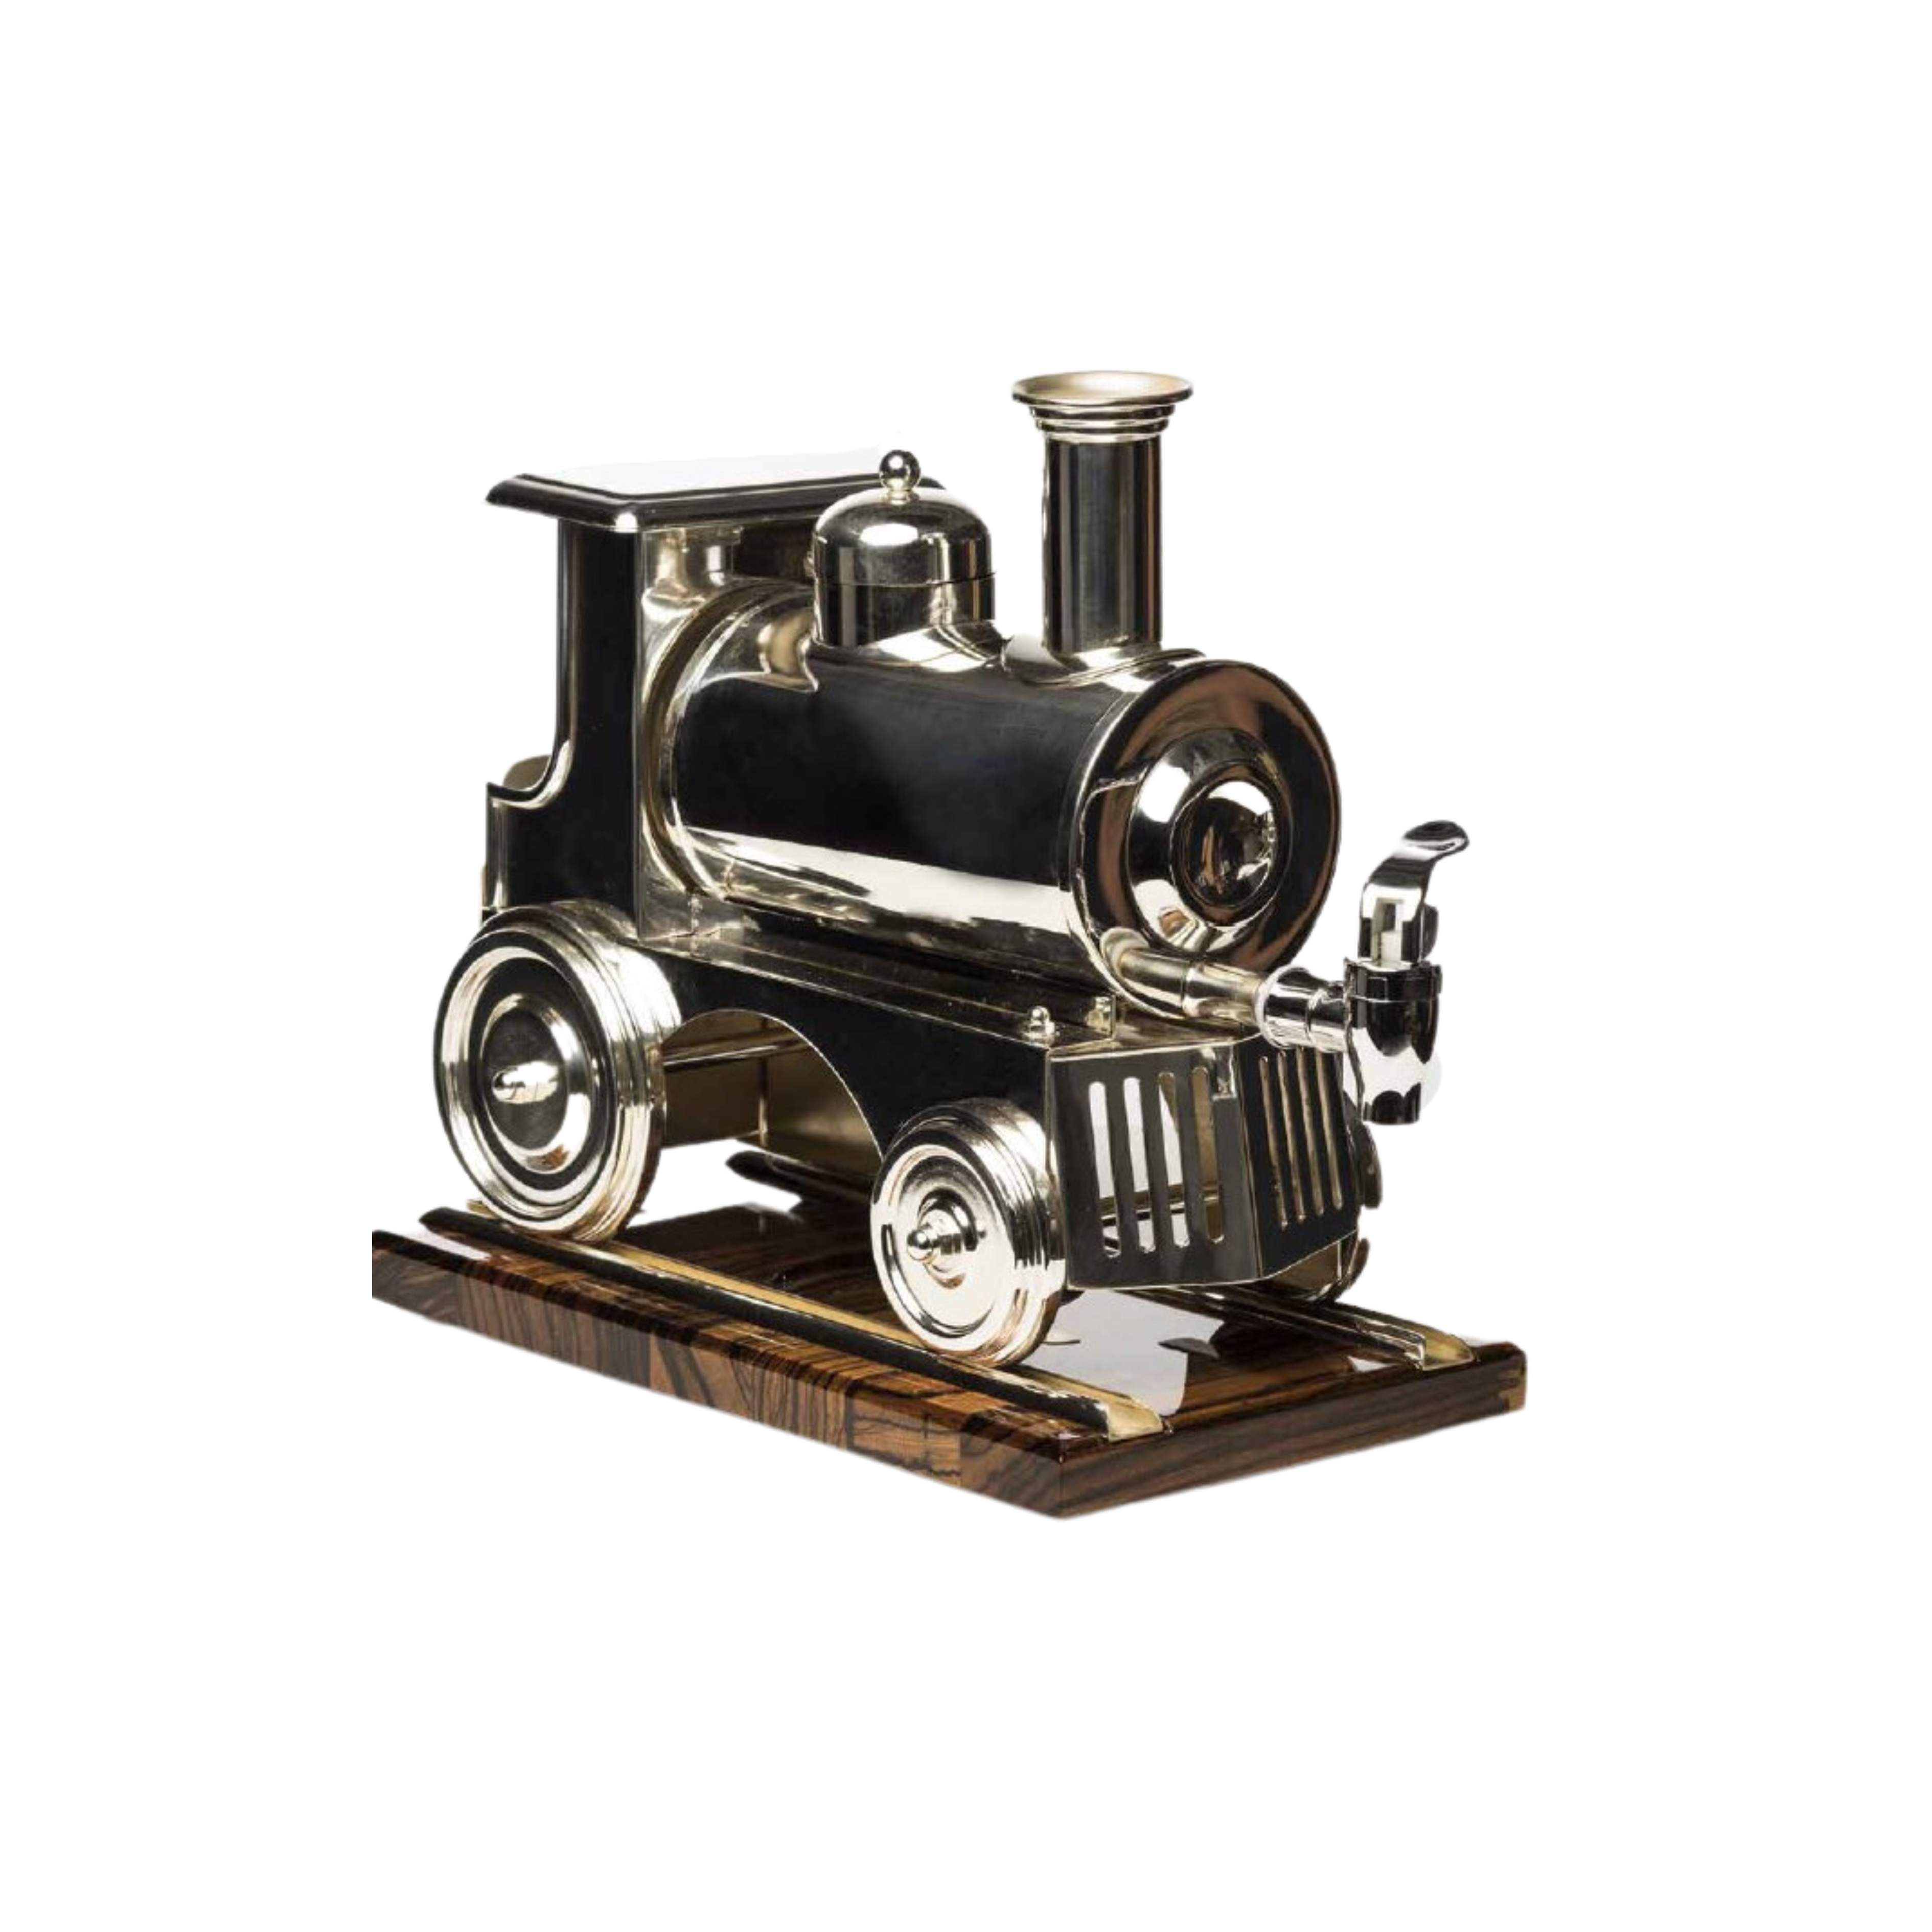 Silver plated “Train” on wooden base